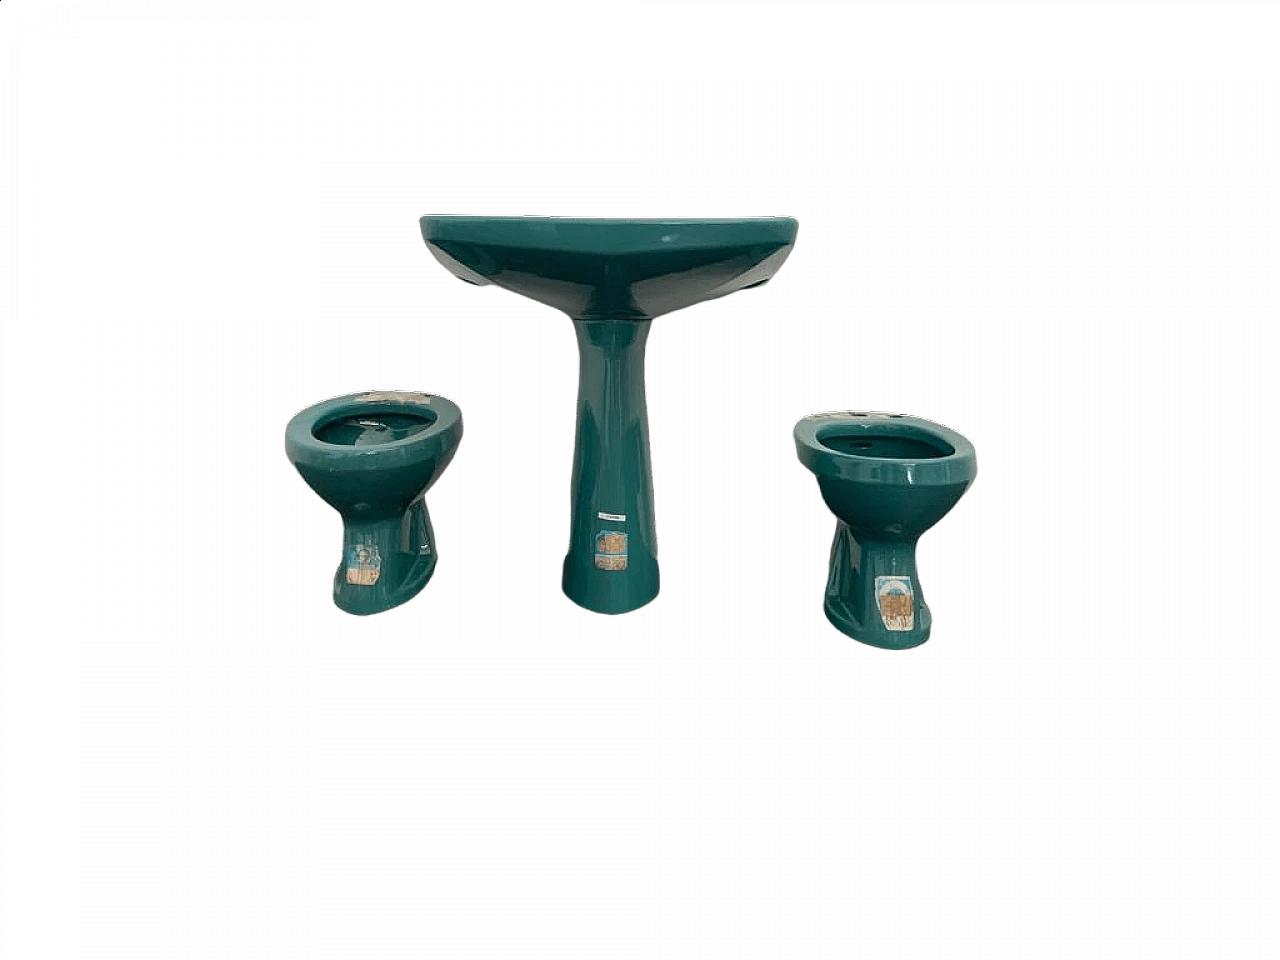 Bathroom fixtures by Gio Ponti for Ideal Standard, 1950s 9